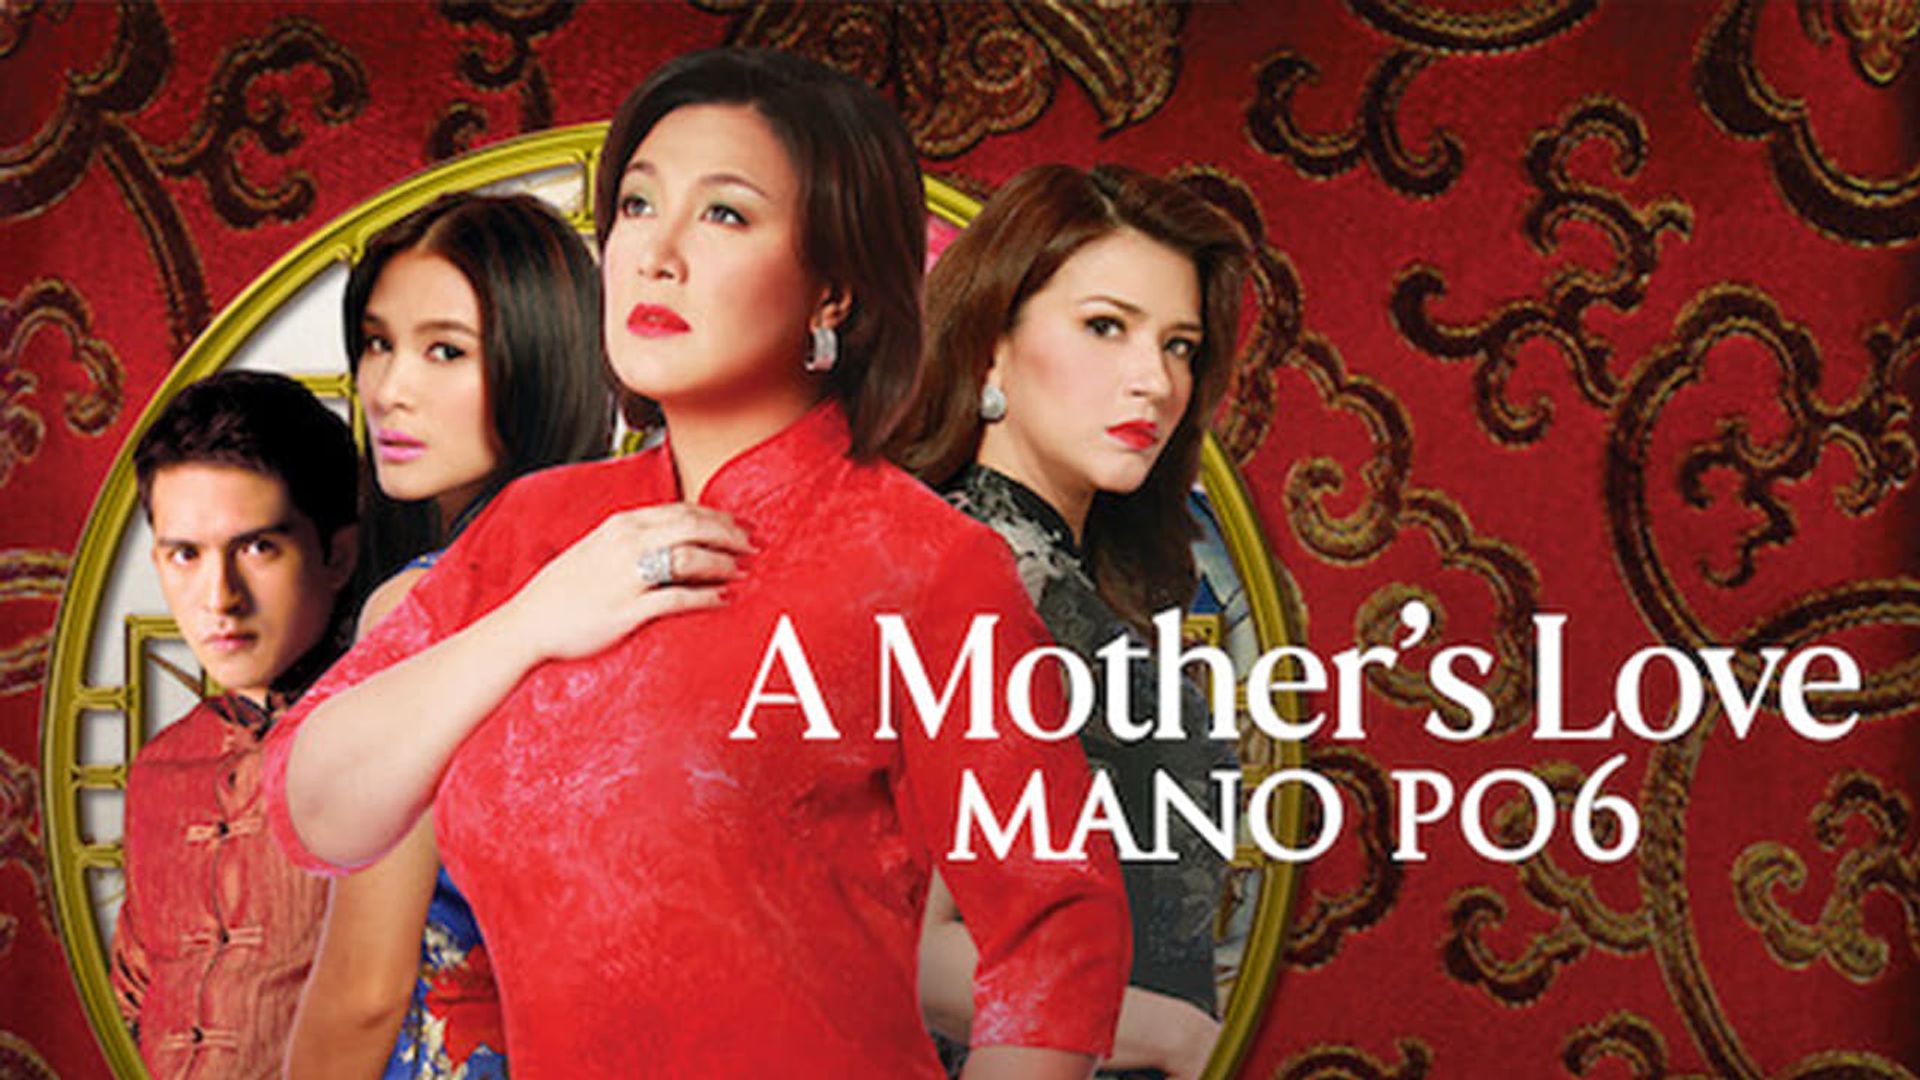 Mano po 6: A Mother's Love background